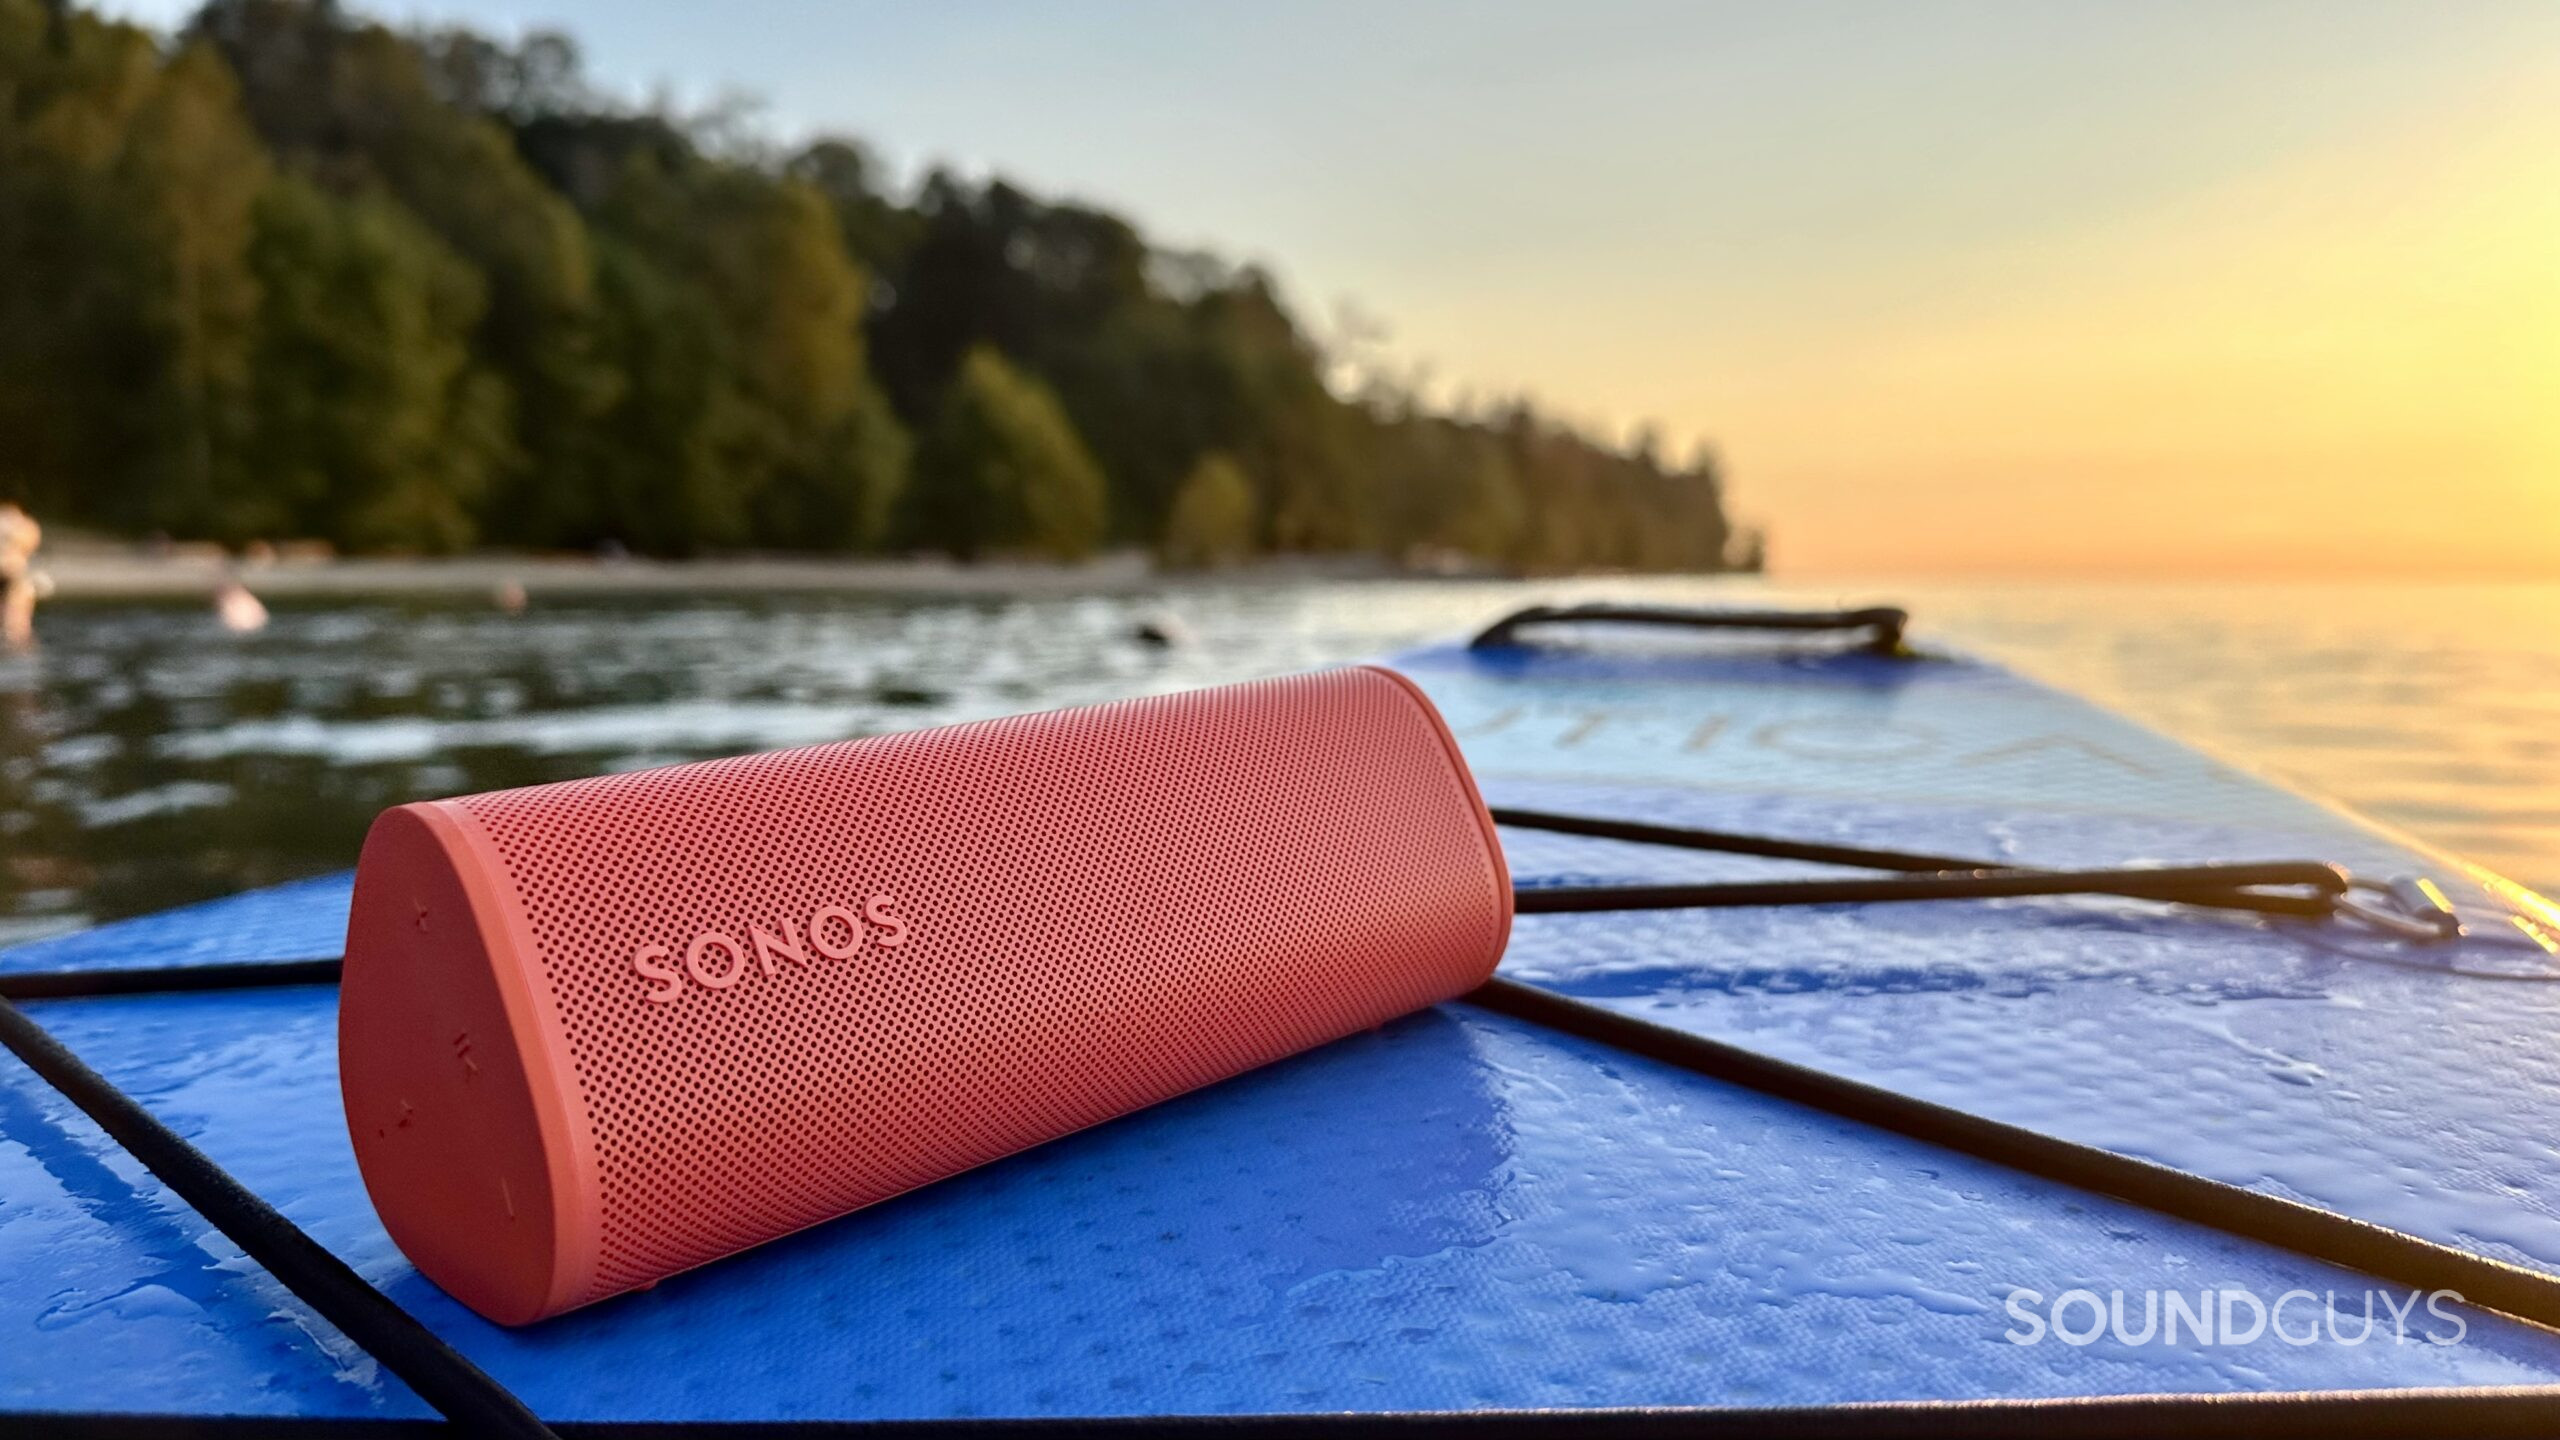 Sonos Roam 2 speaker placed on a paddle board looking towards the sunset